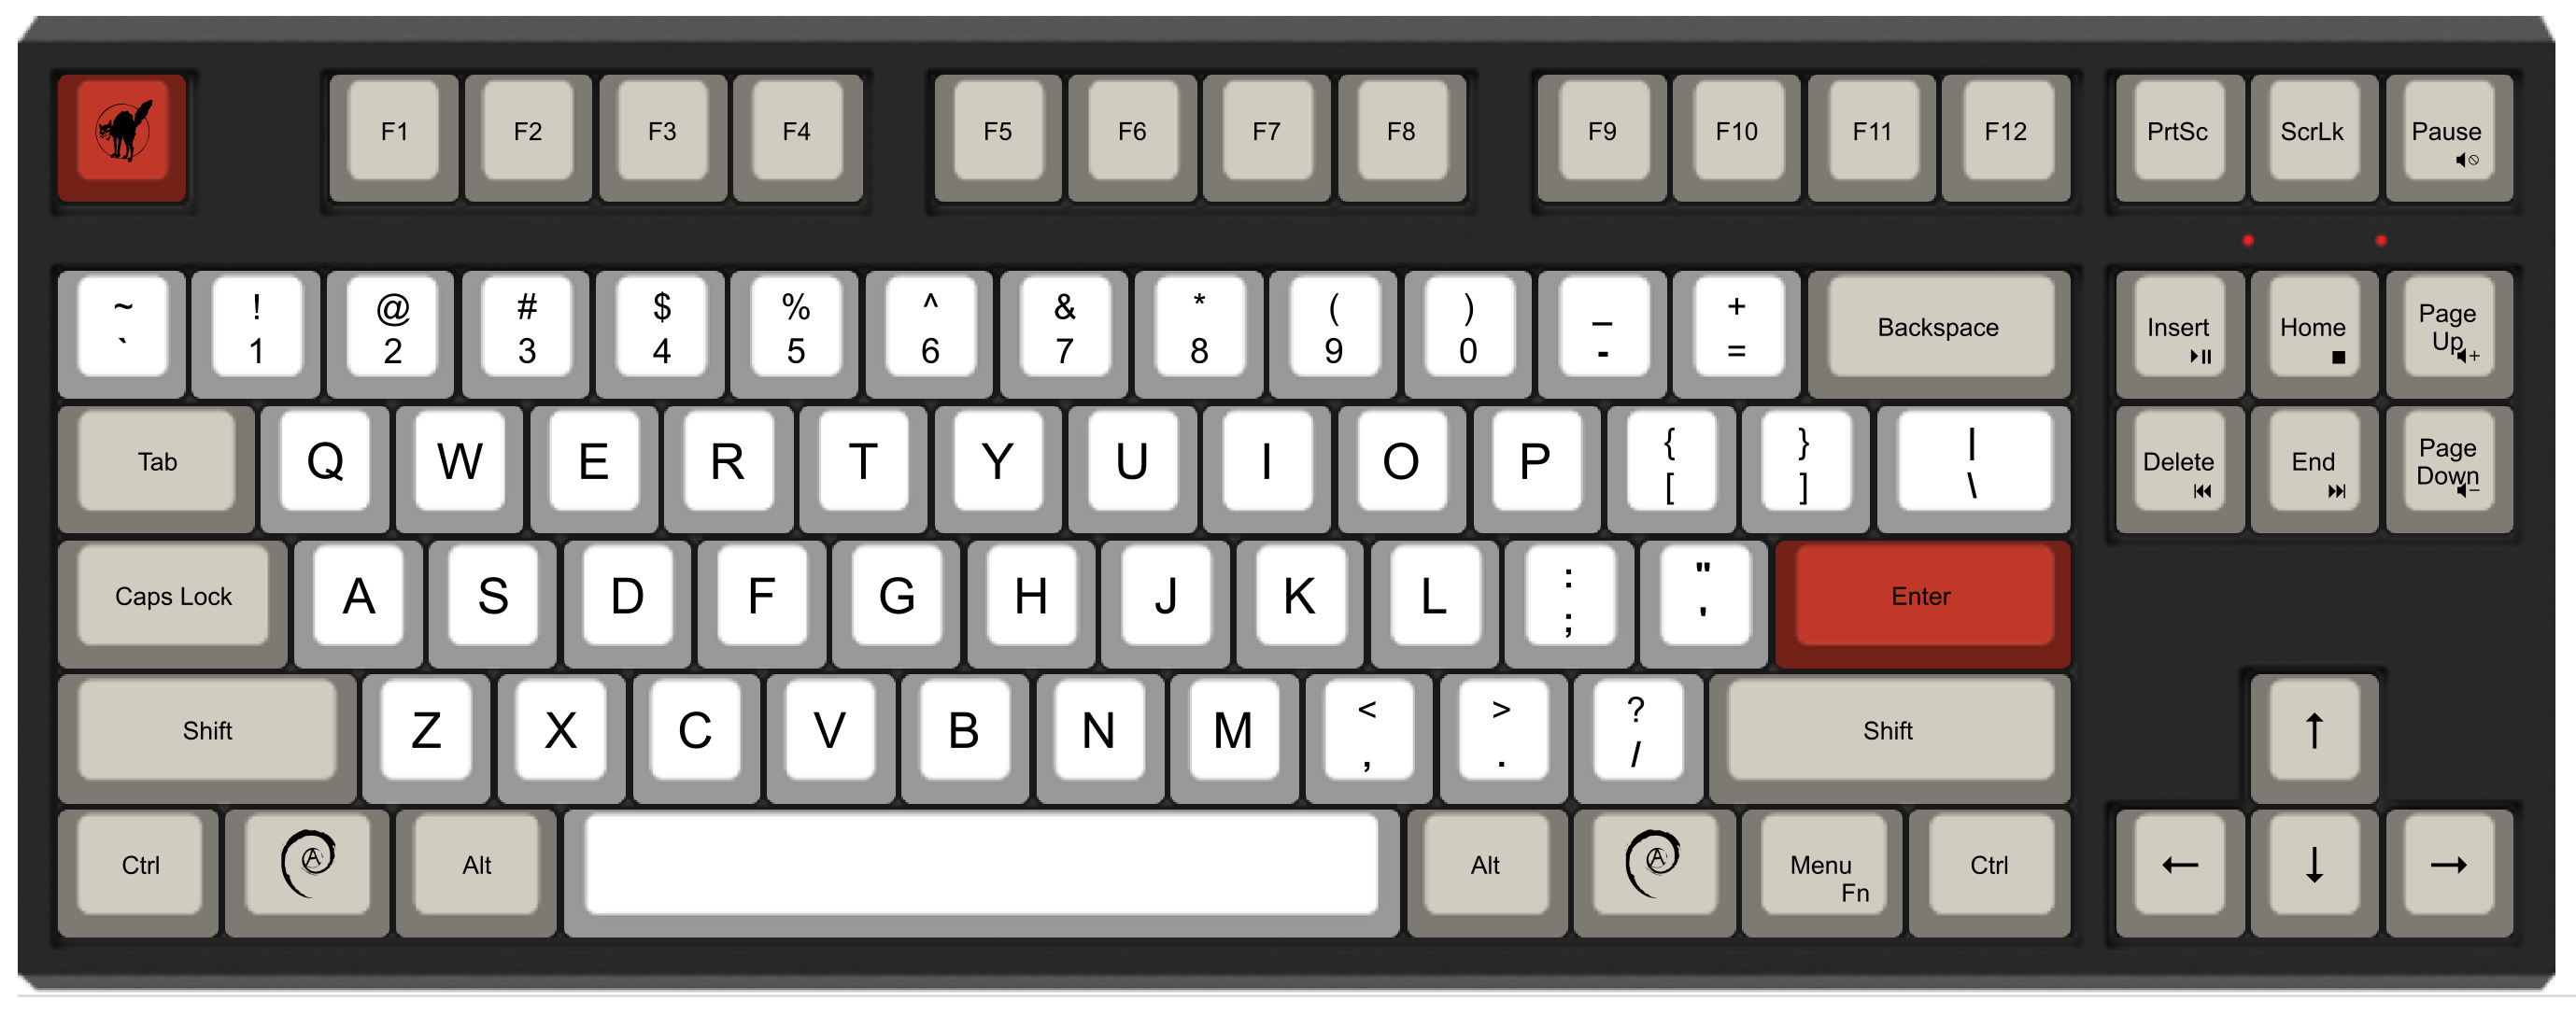 A rendering of the keyboard layout